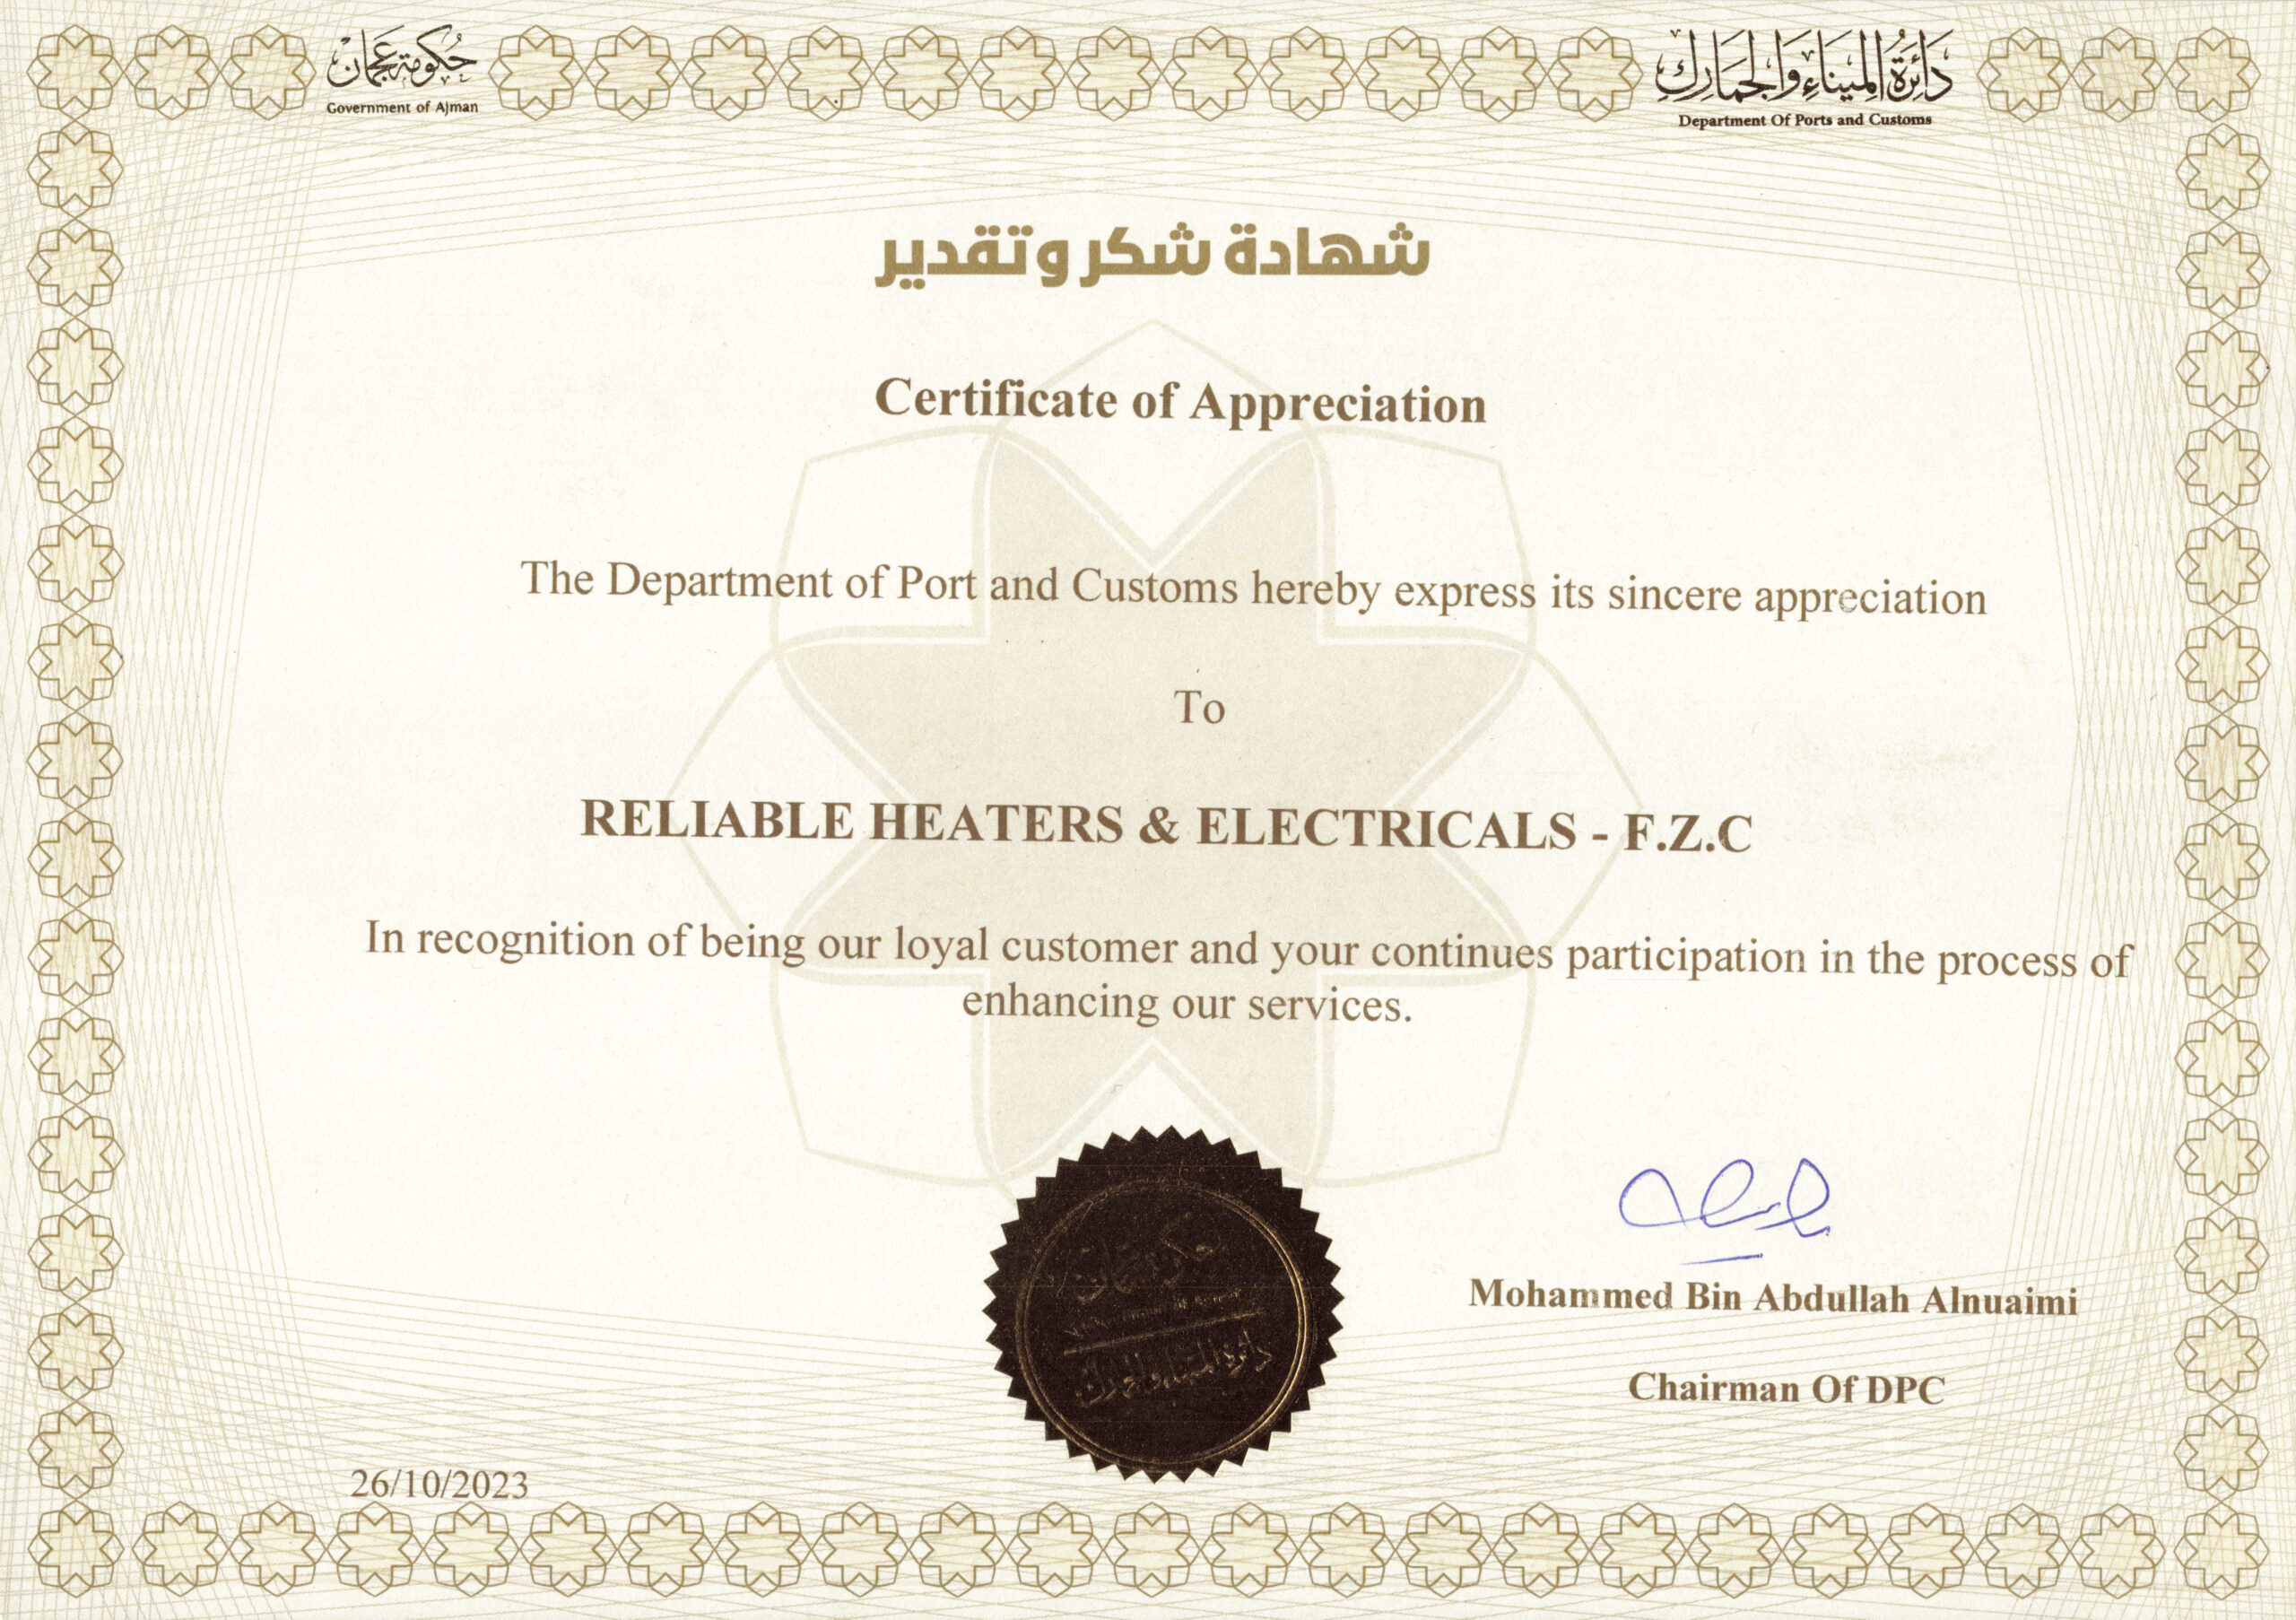 Reliable Heaters & Electricals FZC, Receives Appreciation Certificate from Ajman Port and Customs Department, GCC’s Largest Heater & Hot Plate Manufacturer.